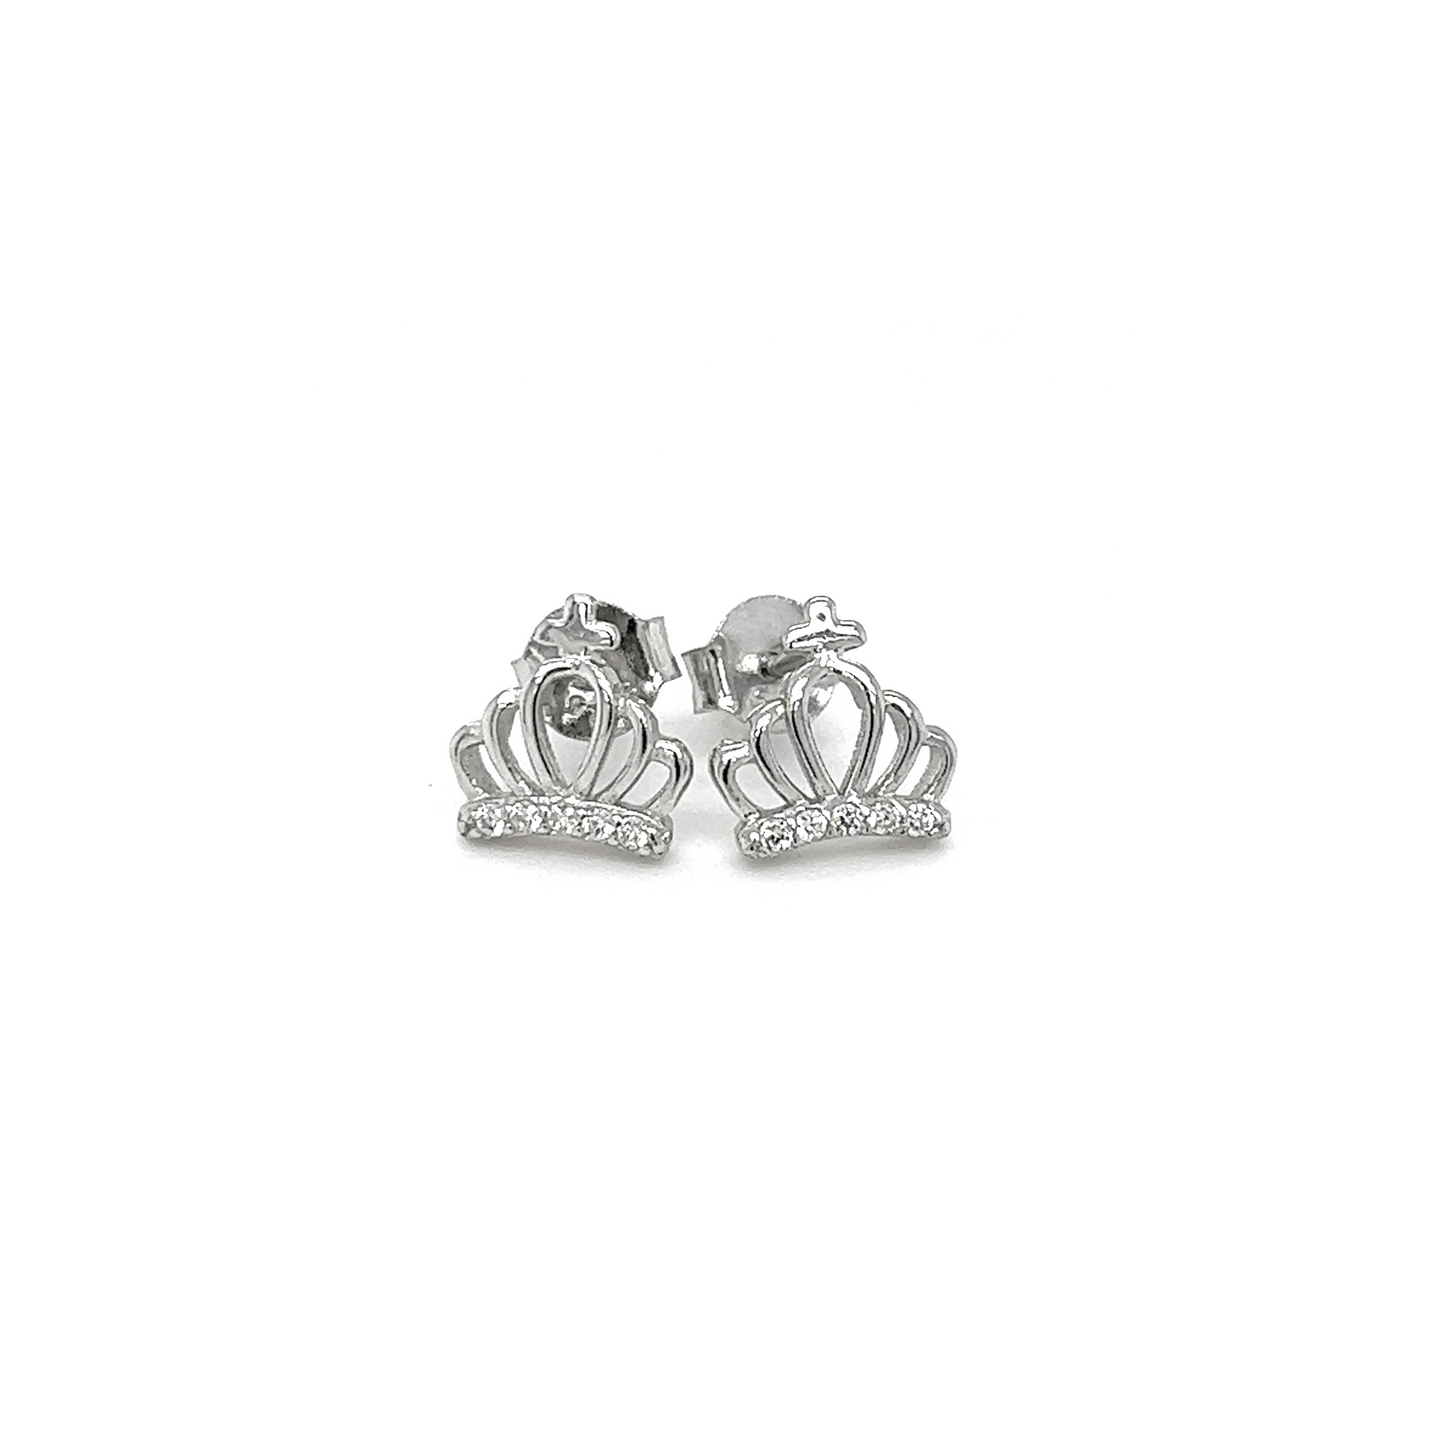 A pair of Super Silver Crown CZ Studs with cubic zirconia diamonds.